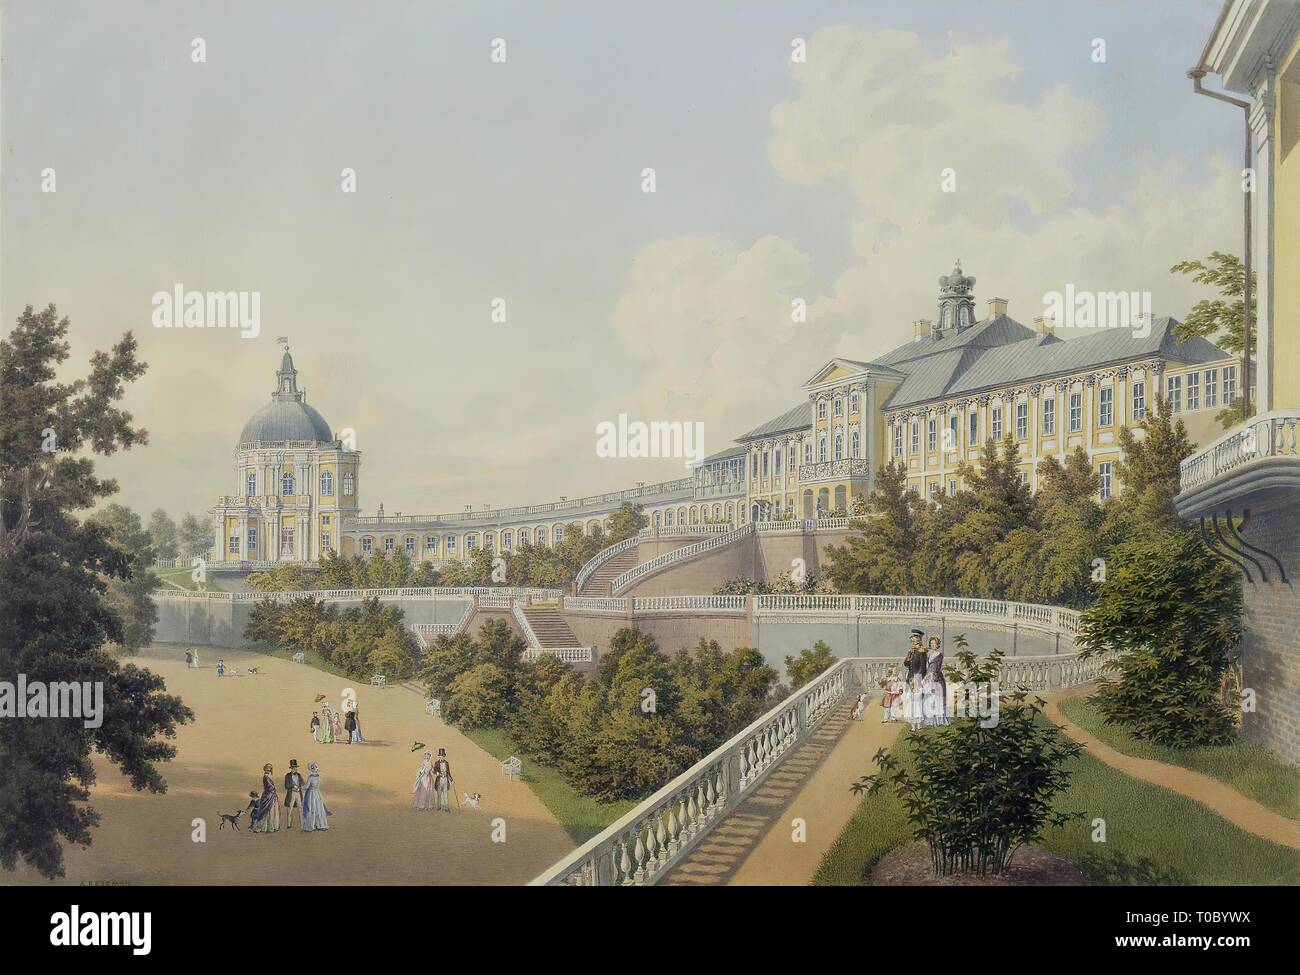 'Great Palace in Oranienbaum'. Series 'Views of St Petersburg and Moscow', produce as a gift to Queen Victoria on the occasion of the 10th anniversary of her reign. Russia, 1847. Dimensions: 25,5x37,8 cm. Museum: State Hermitage, St. Petersburg. Author: Adolf Besemann . Adolf Bezemann. Stock Photo